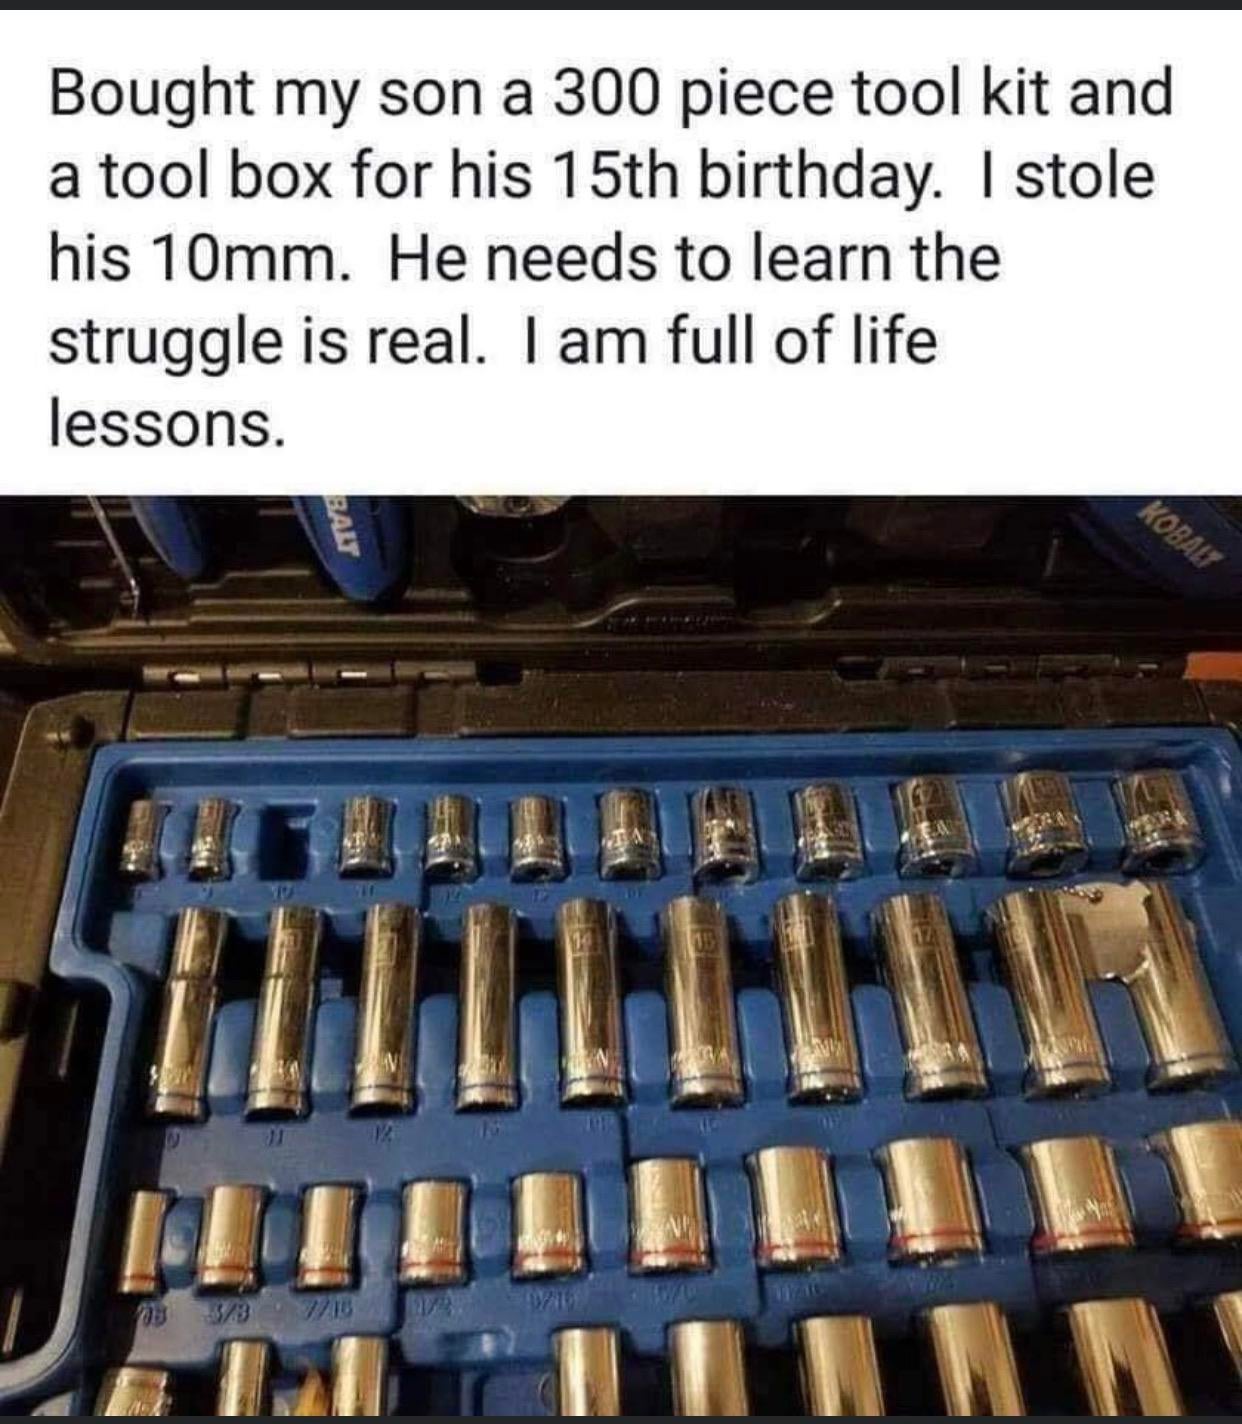 funny memes and pics - tool kit meme - Bought my son a 300 piece tool kit and a tool box for his 15th birthday. I stole his 10mm. He needs to learn the struggle is real. I am full of life lessons. 155 Balt 03 33 718 That Kobalt Inn